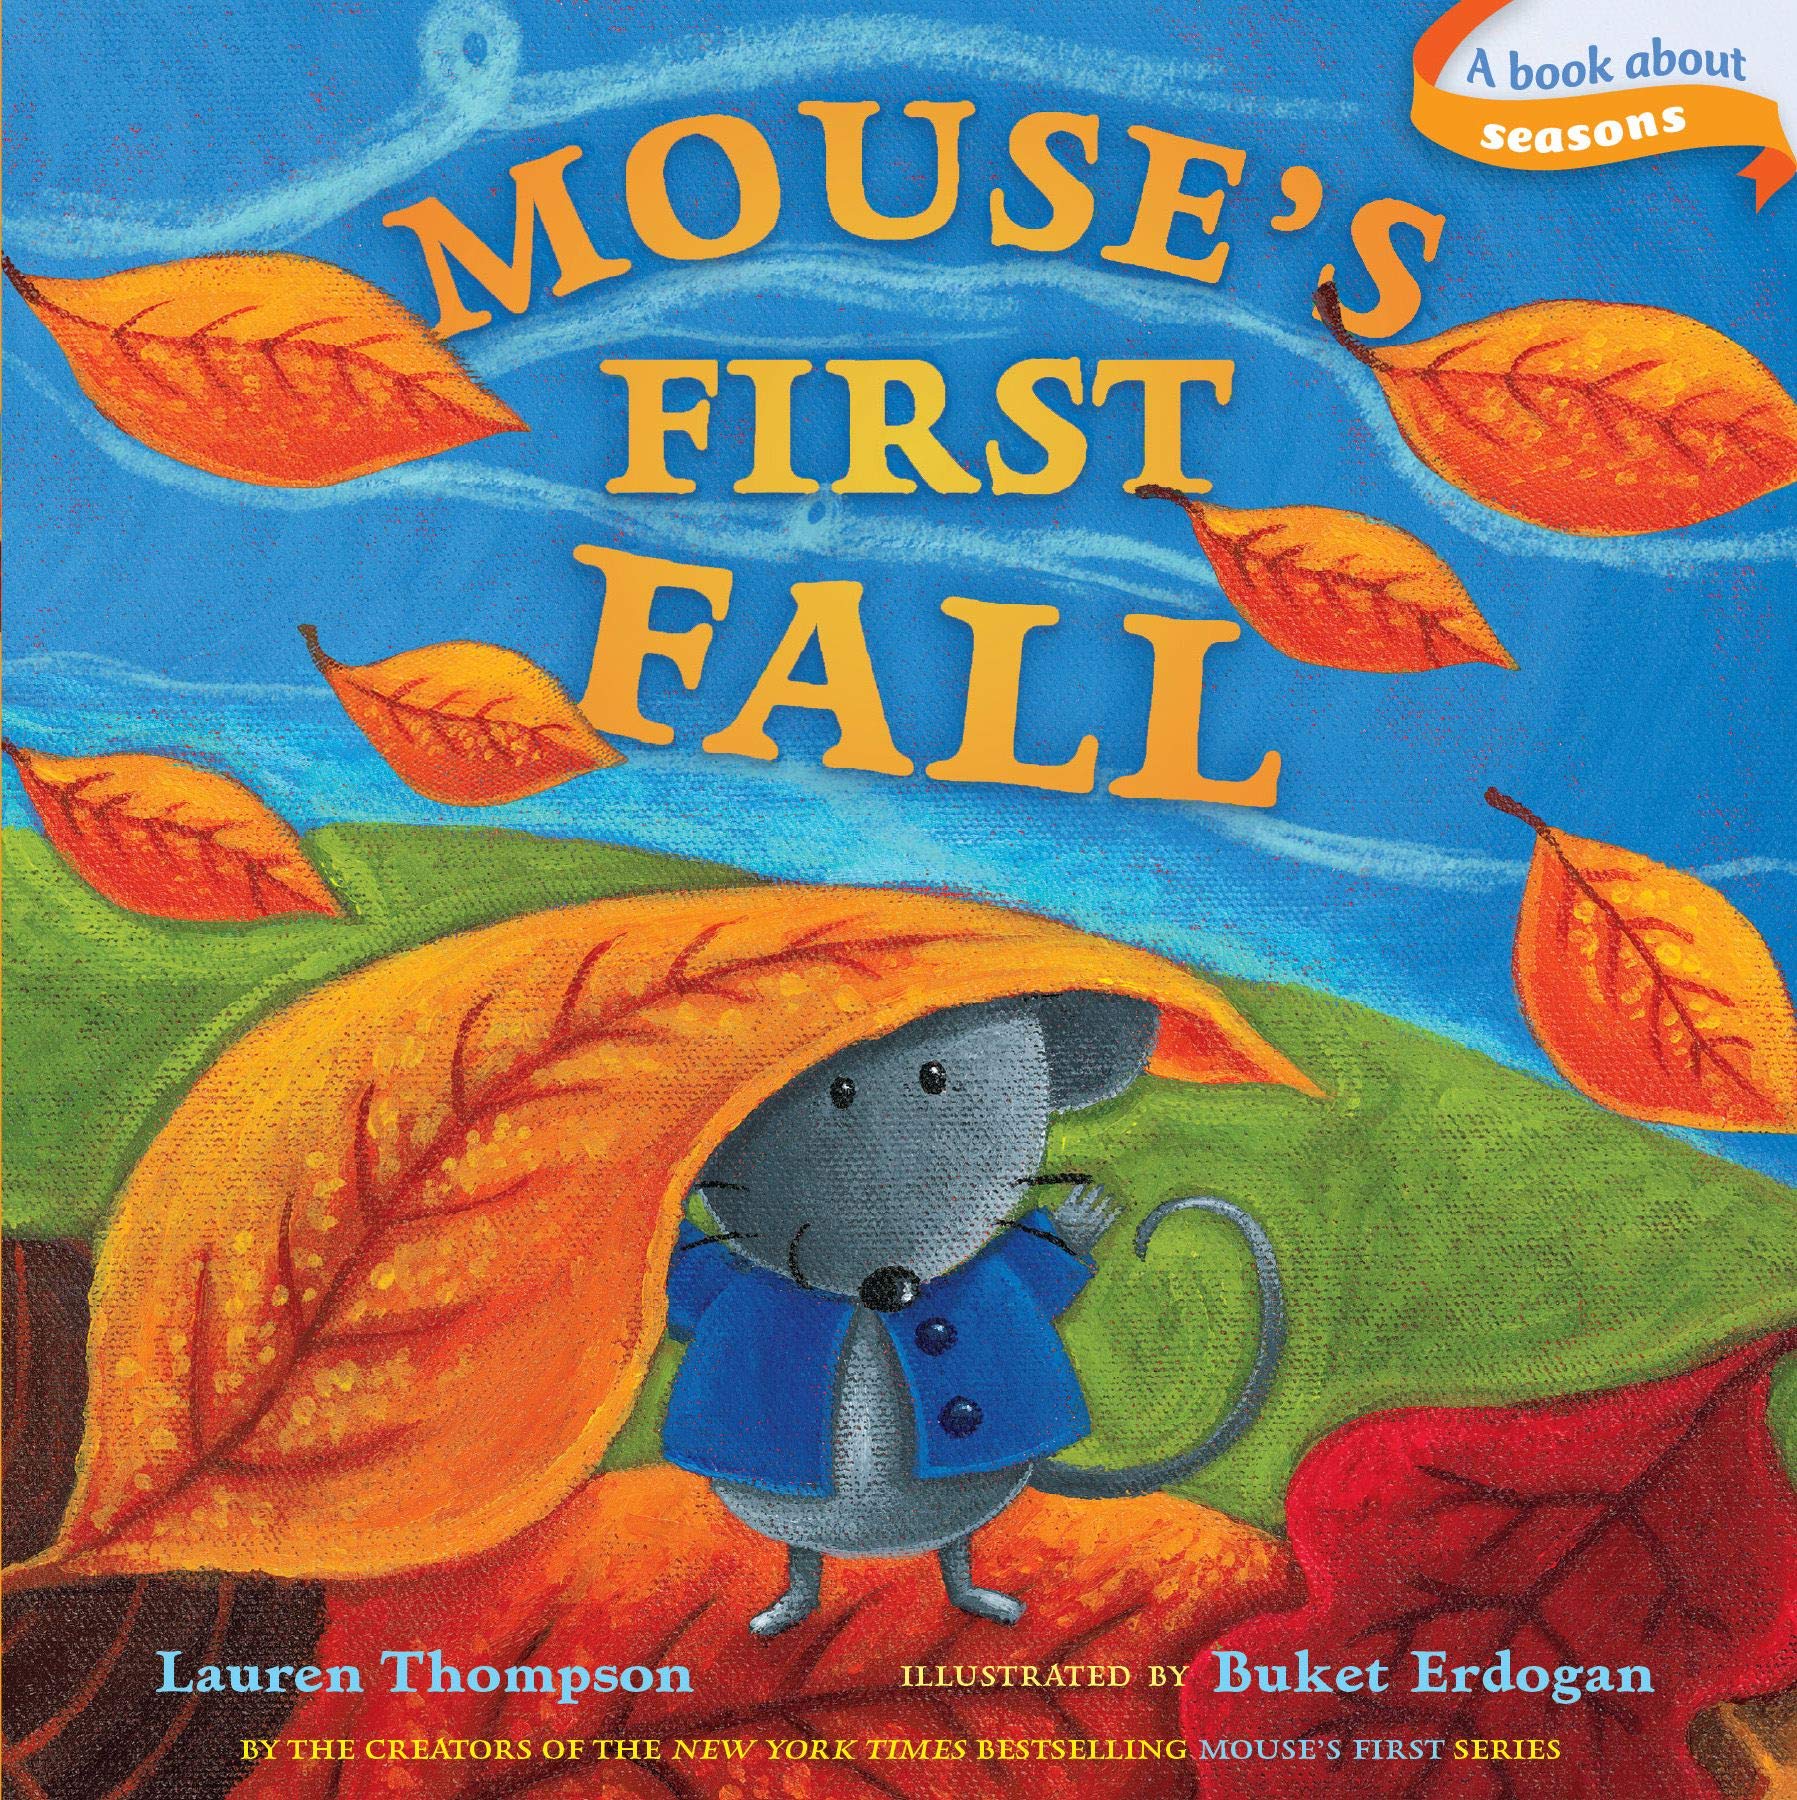 speech and language teaching concepts for Mouse's First Fall in speech therapy​